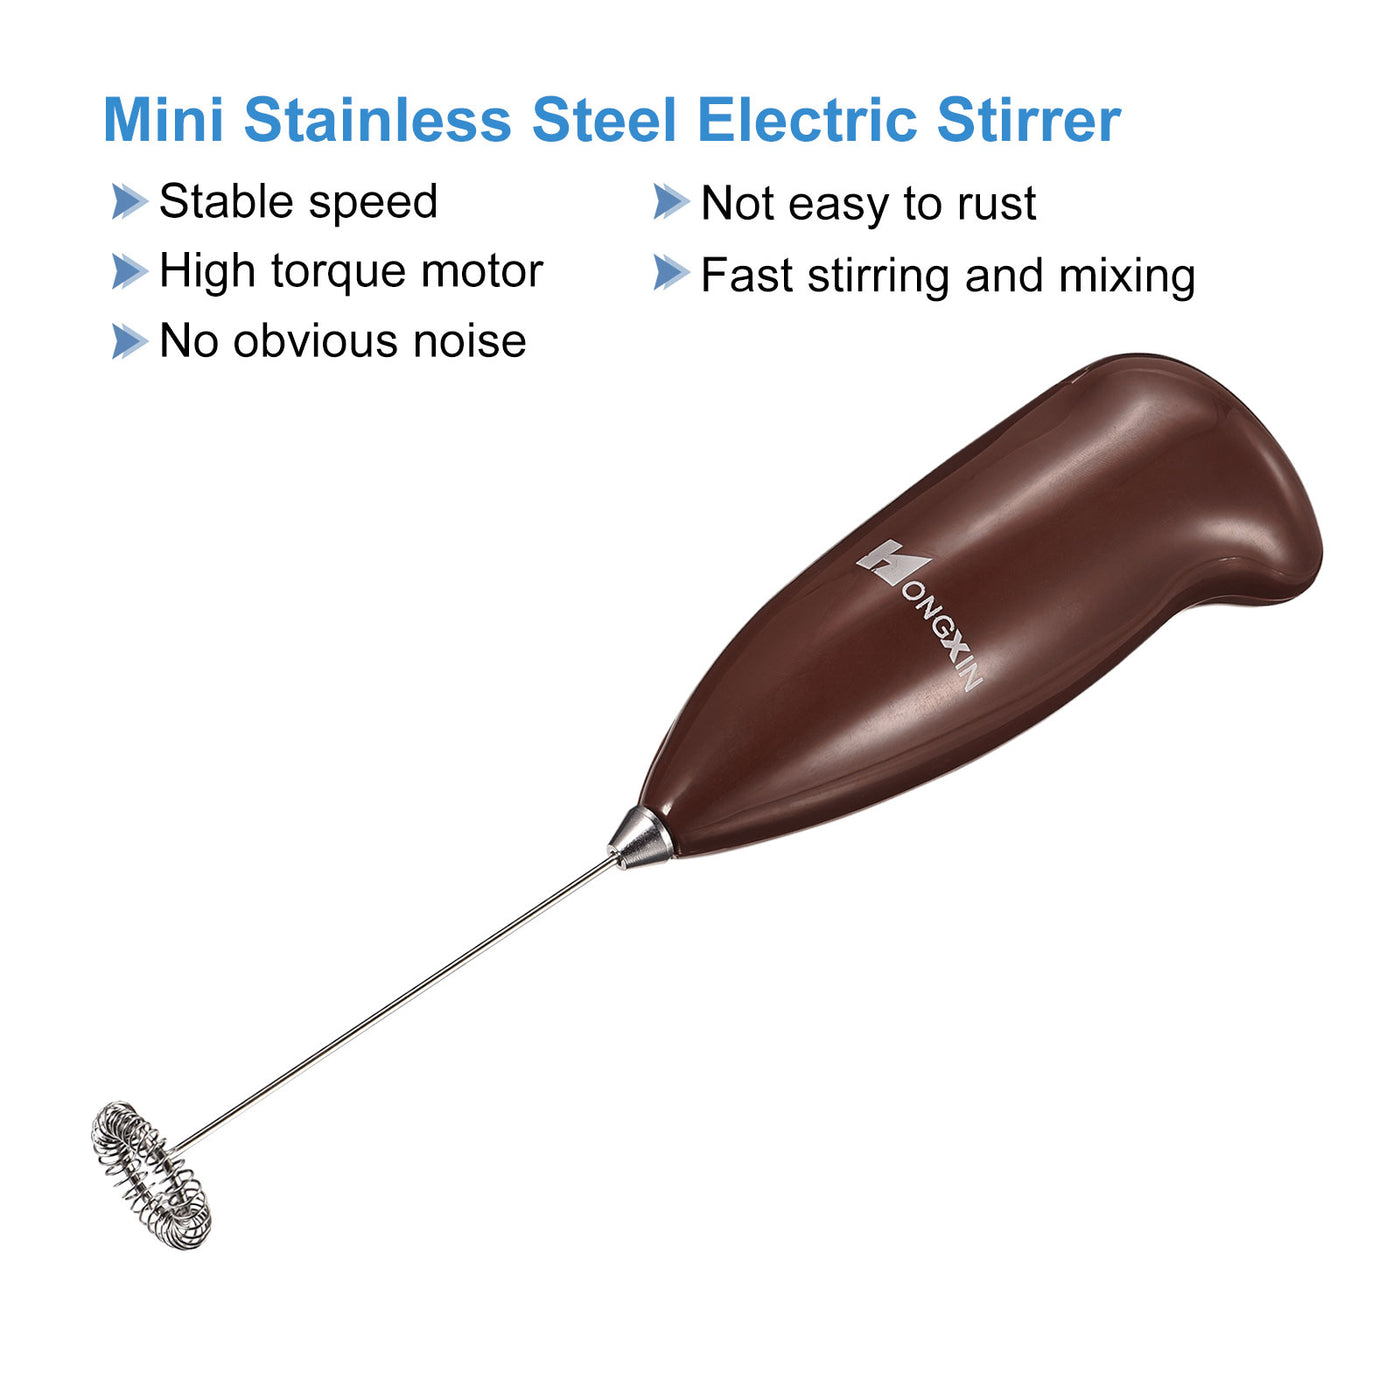 Harfington Mini Electric Tumbler Stirrer, Handheld Mixer Battery Operated Stirring Brown for DIY Glitter Tumbler Cup